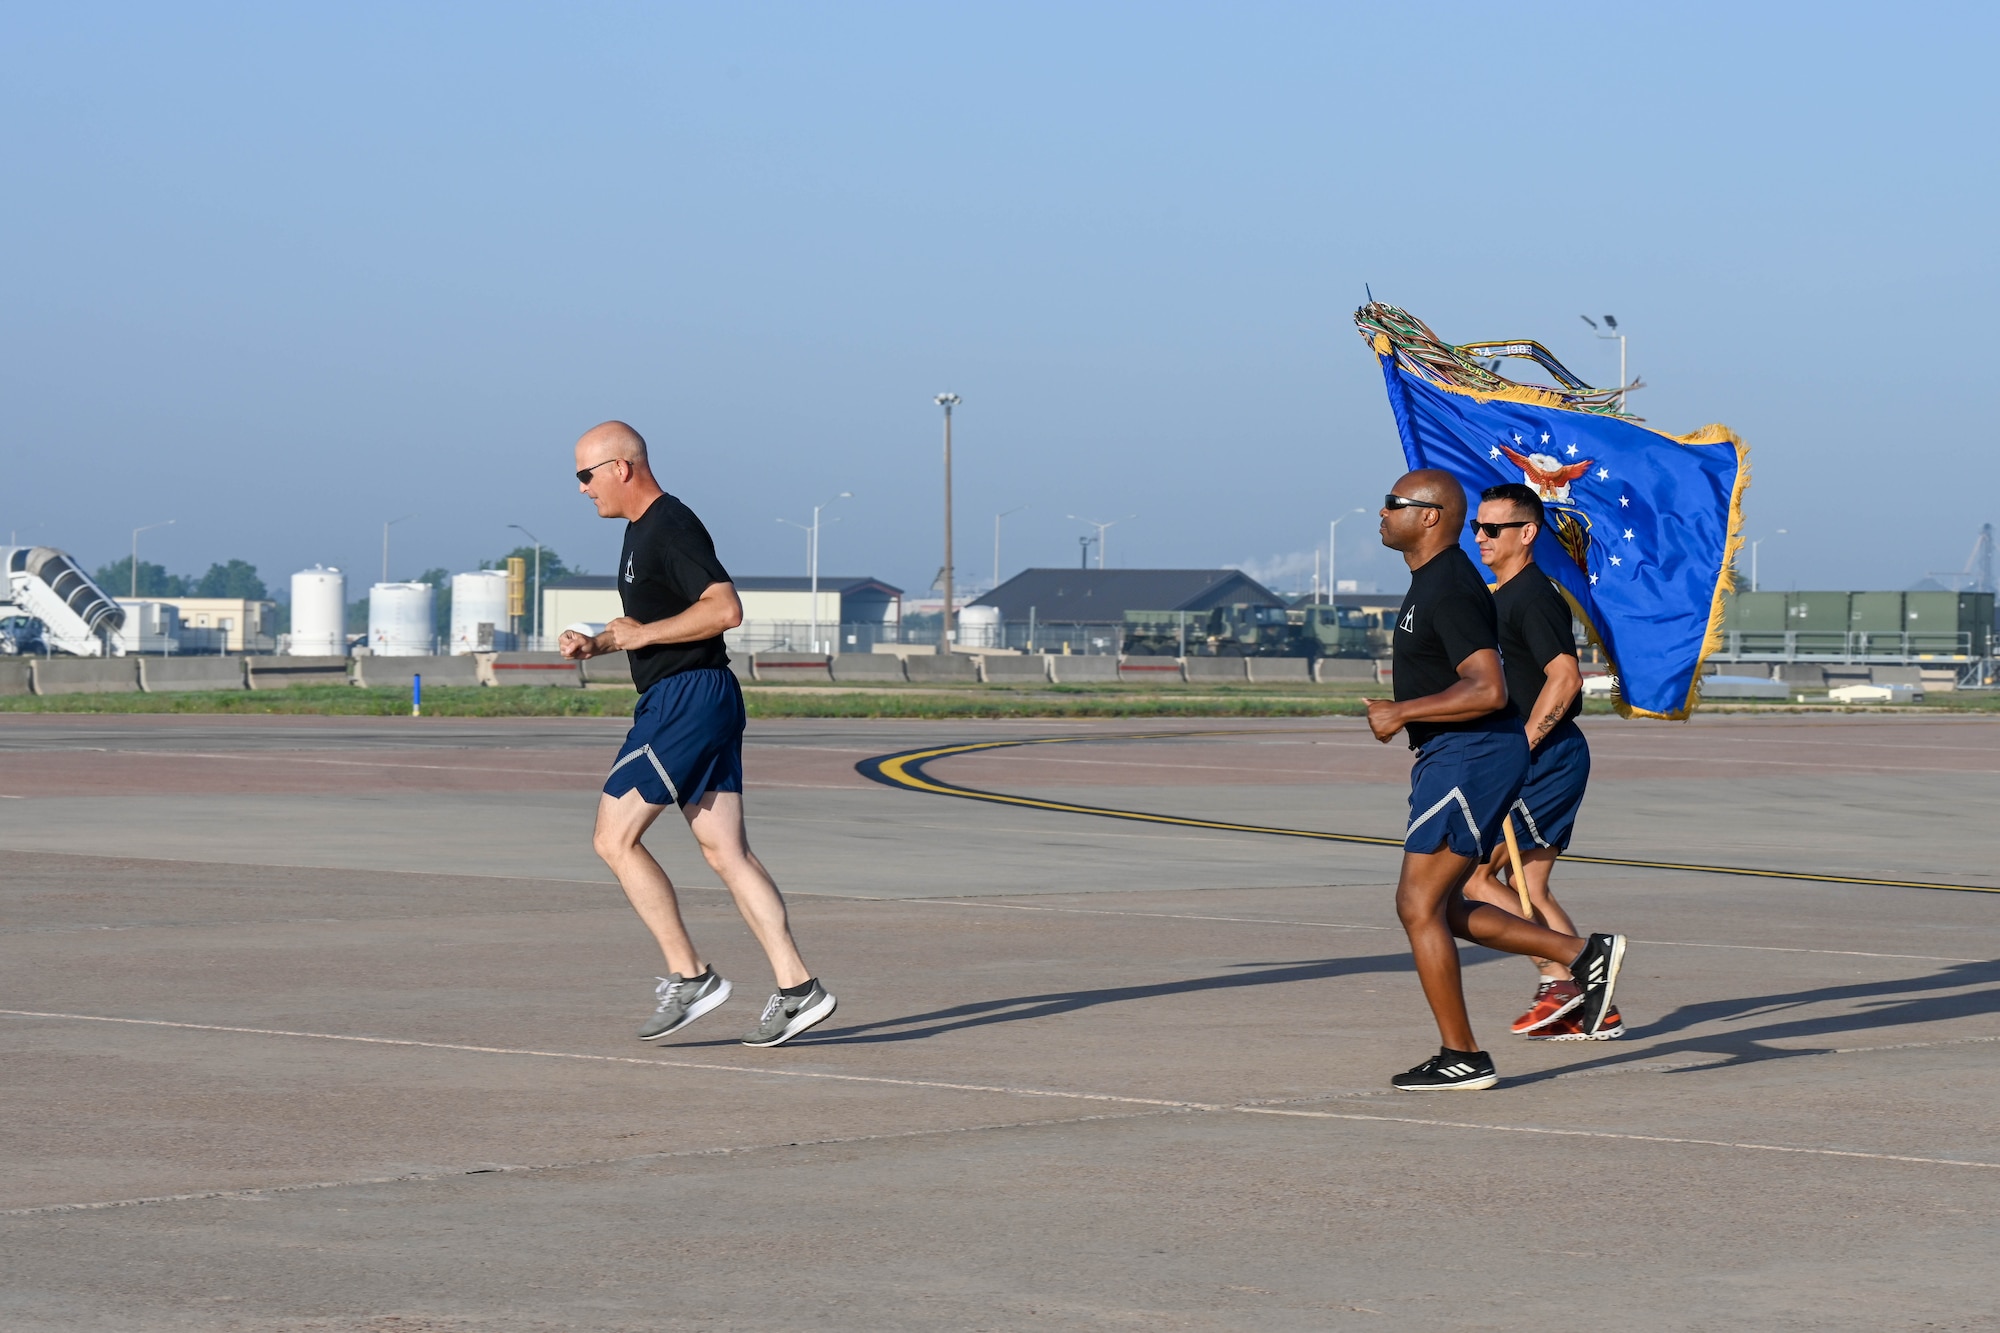 U.S. Air Force Col. Blaine Baker (left), 97th Air Mobility Wing (AMW), Col. Patrick Brady-Lee (center), 97th AMW vice commander, and Chief Master Sgt. Cesar Flores (right), 97th AMW command chief, run on the flight line at Altus Air Force Base, Oklahoma, May 12, 2023. Baker, Brady-Lee and Flores led Airmen from the 97th AMW during their 5K wing run around the flight line. (U.S. Air Force photo by Senior Airman Trenton Jancze)